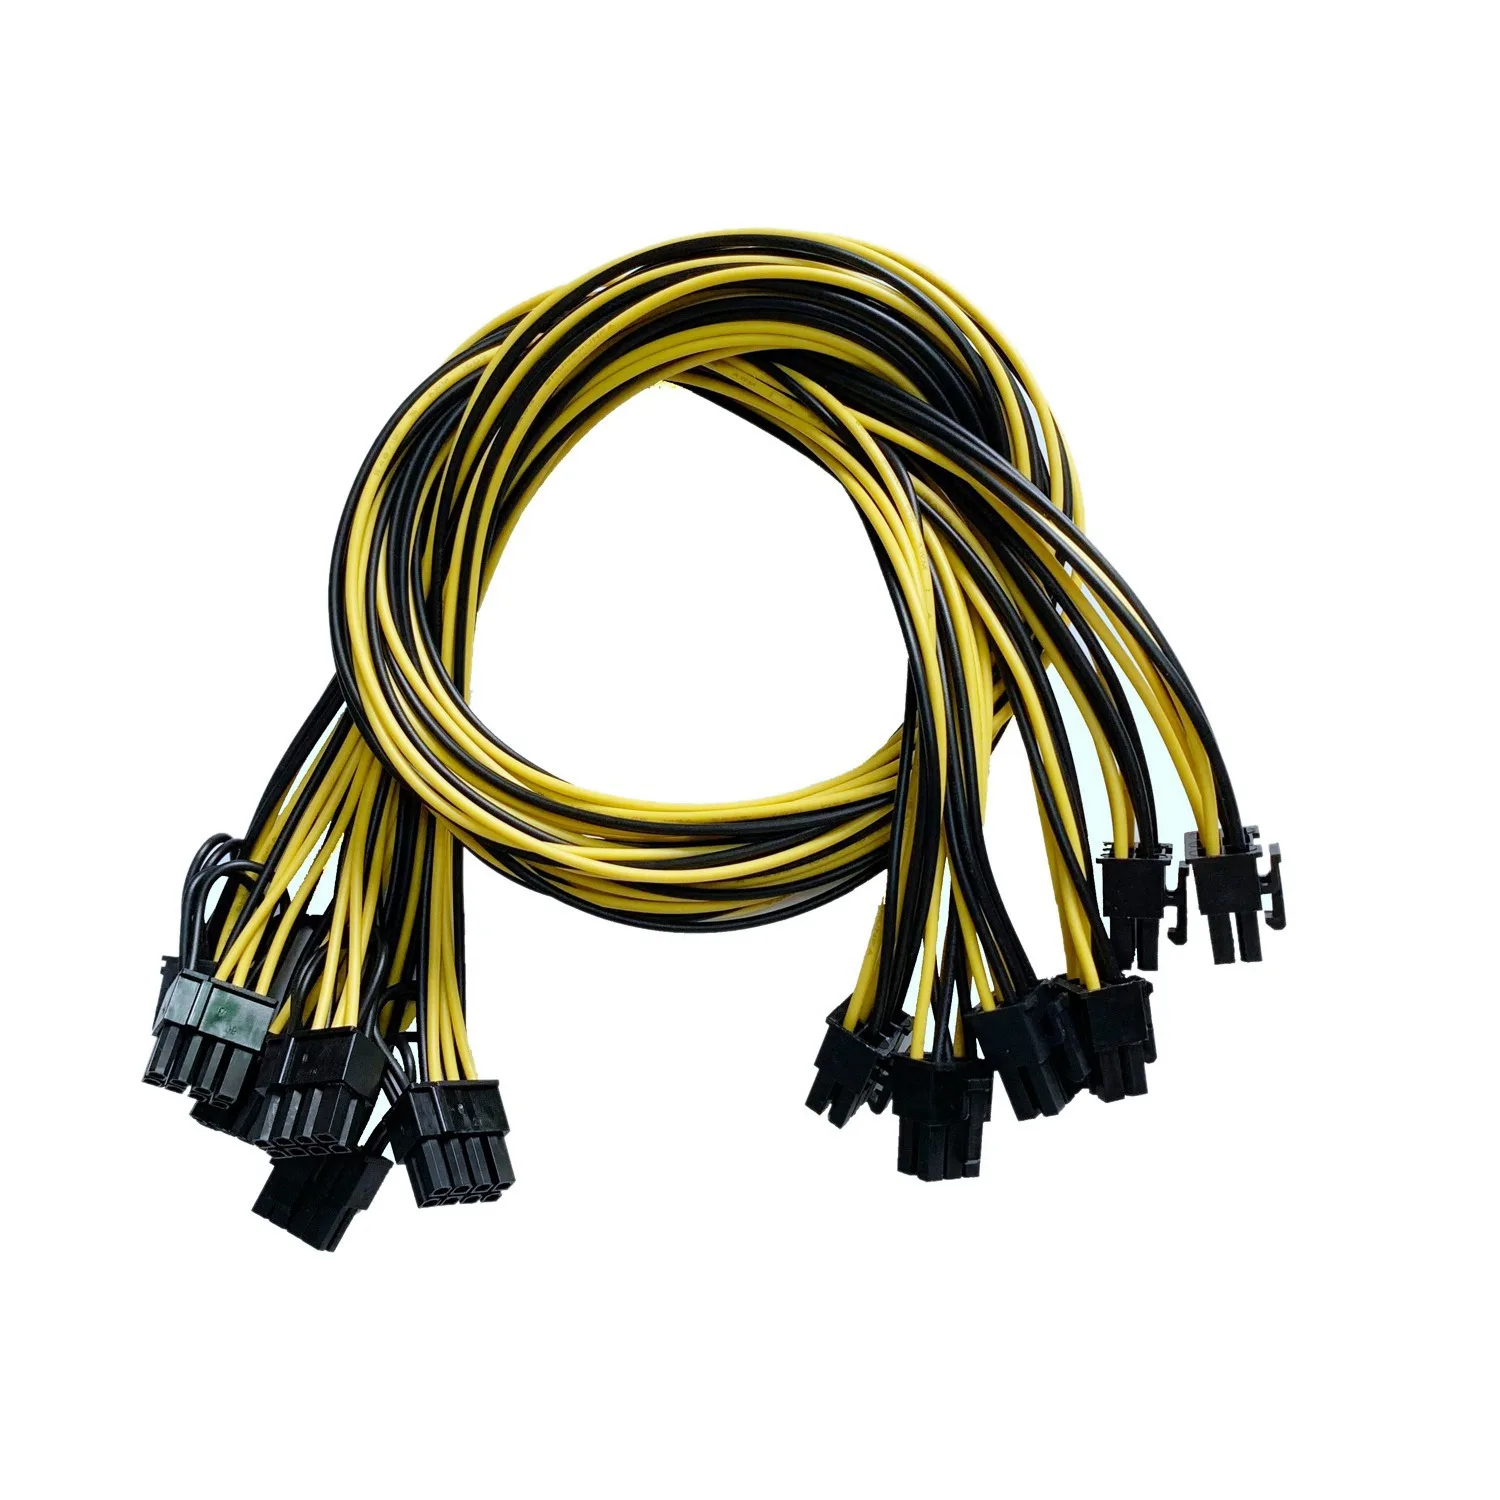 

6Pcs PCIe 6Pin to 8Pin(6+2) Male to Male PCI-E Power Cable for GPU Power Supply Breakout Board Adapter for Mining